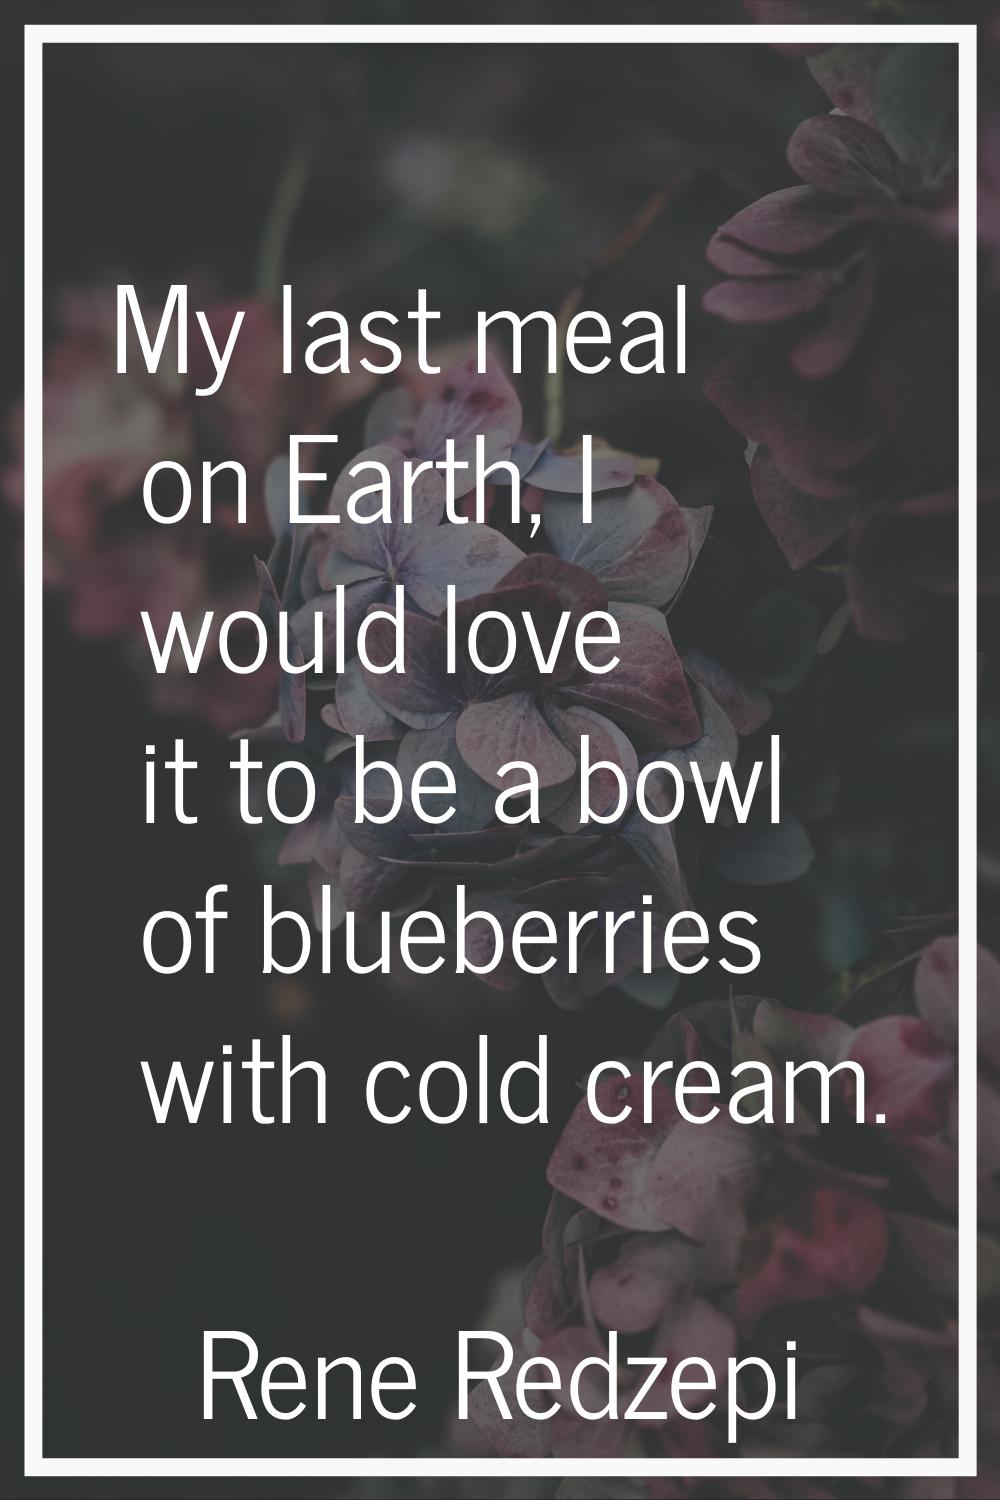 My last meal on Earth, I would love it to be a bowl of blueberries with cold cream.